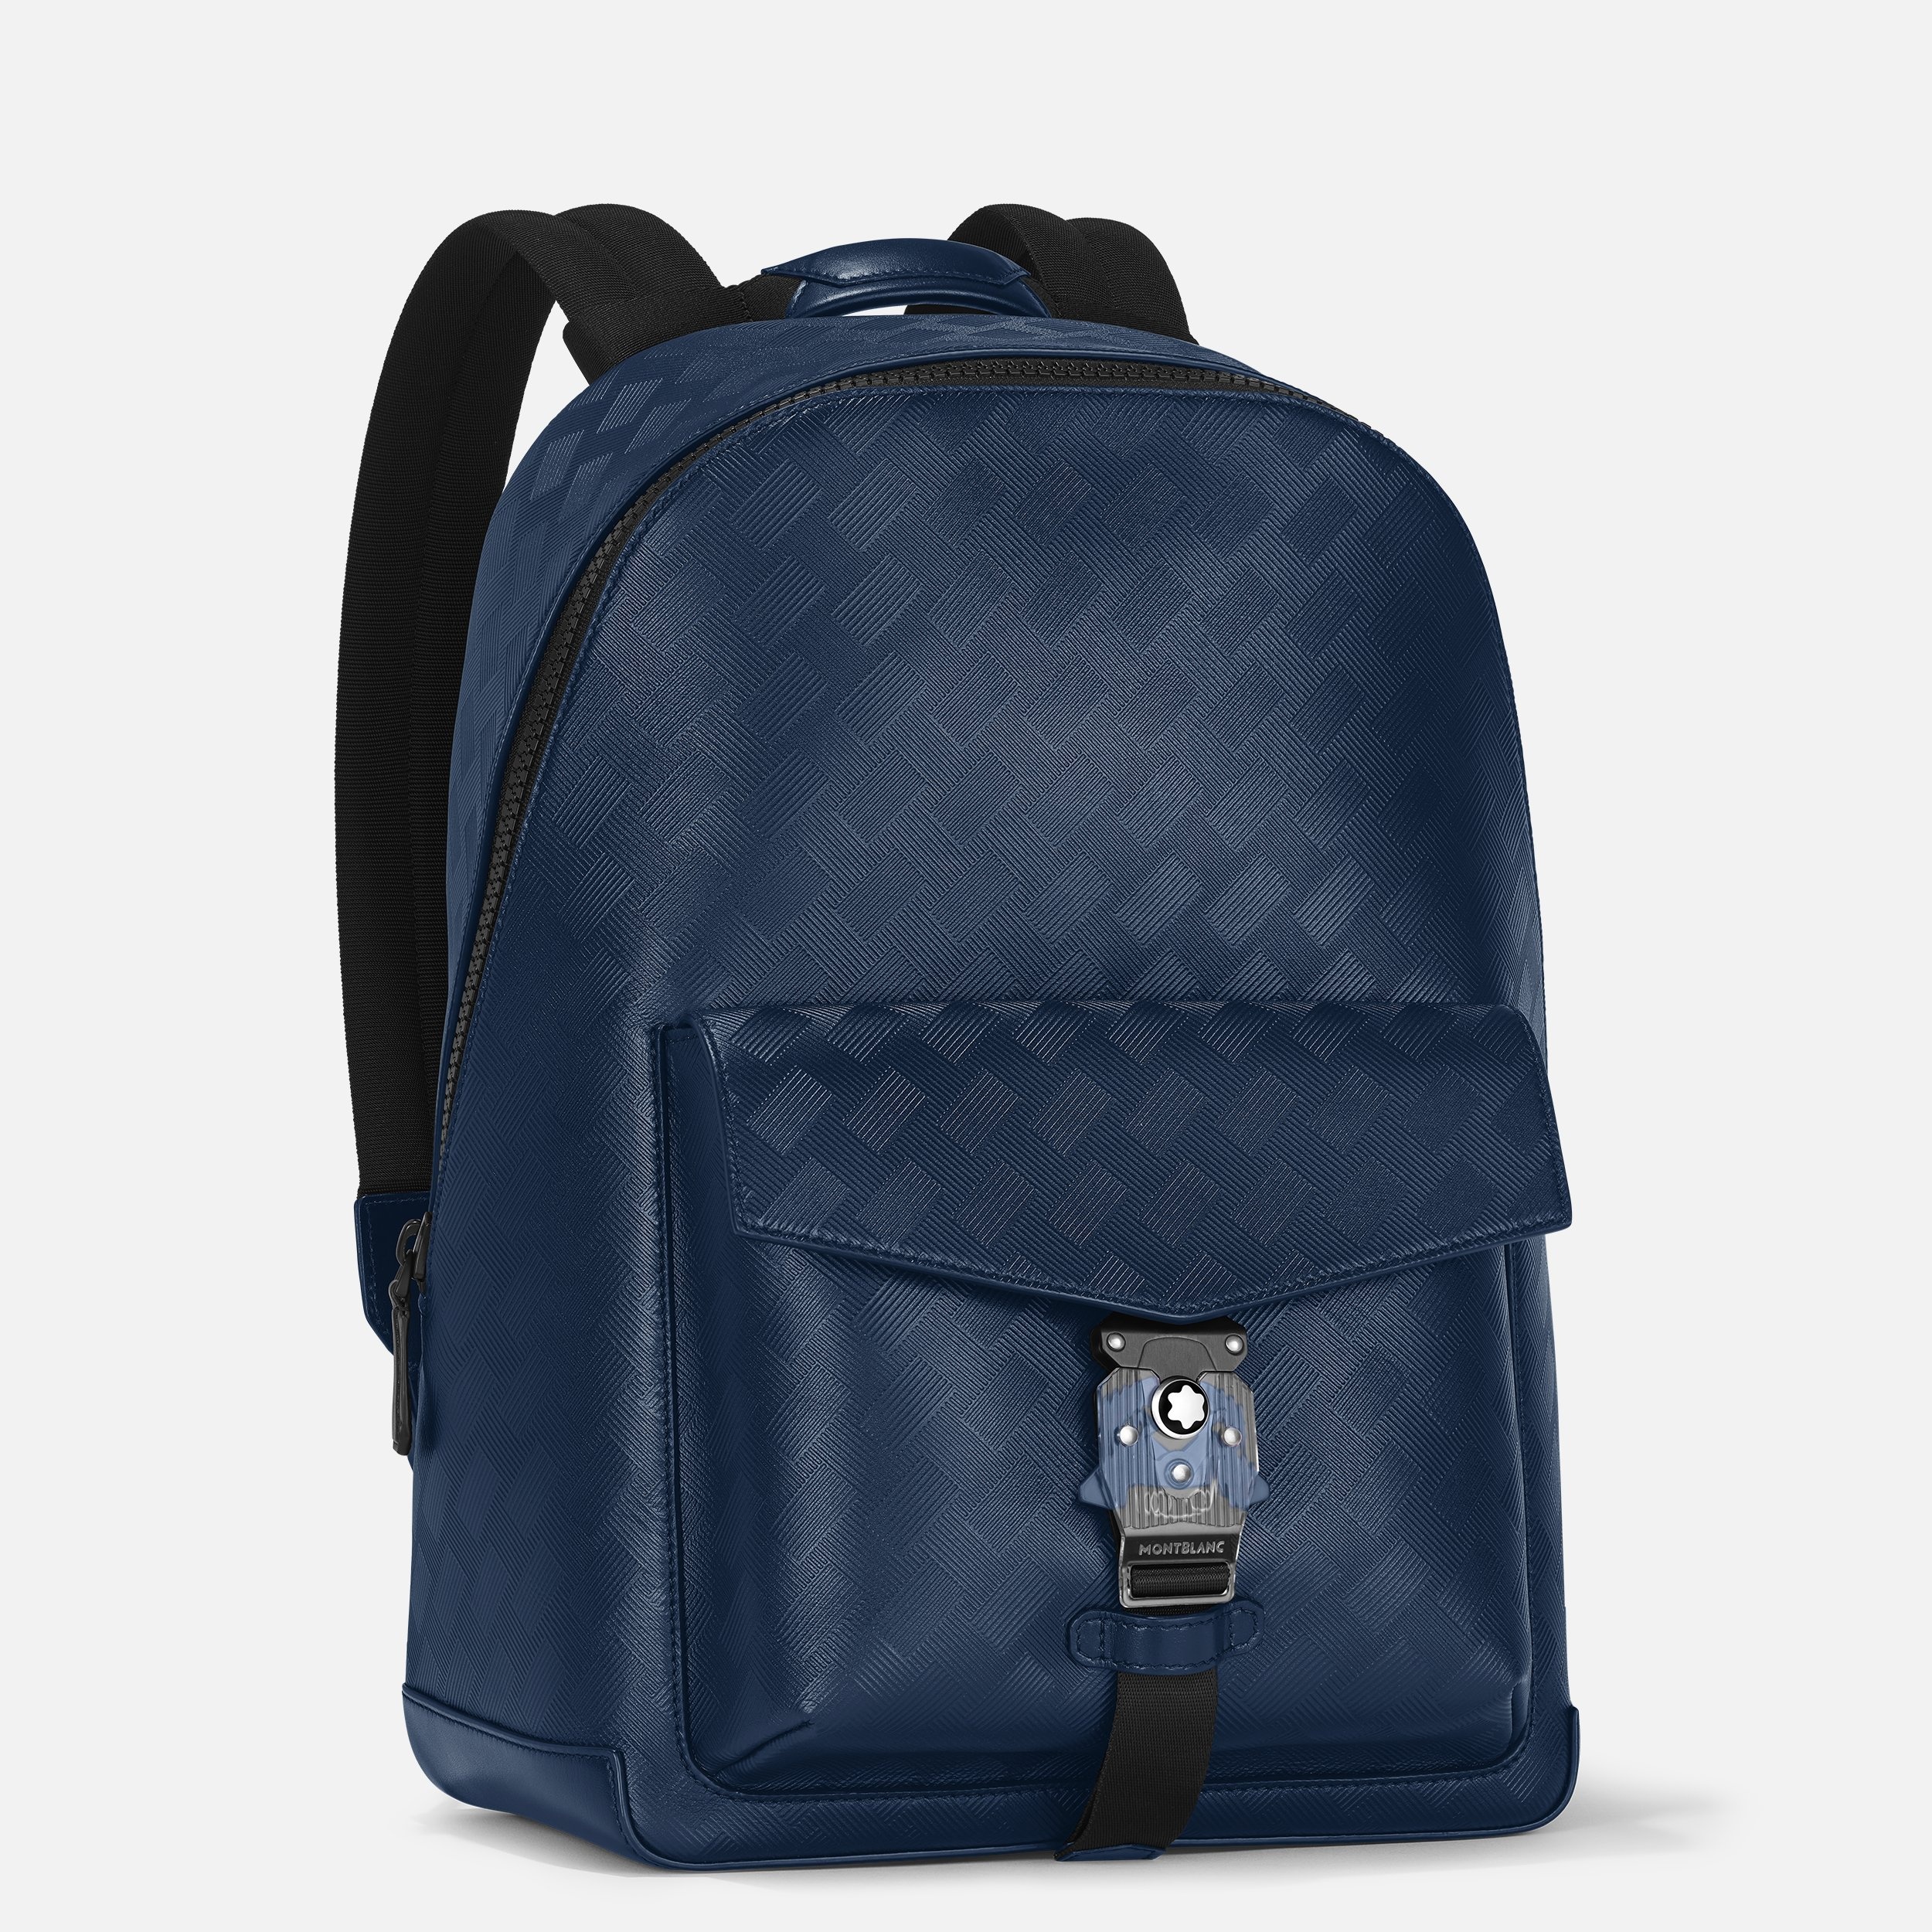 Extreme 3.0 backpack with M LOCK 4810 - 3